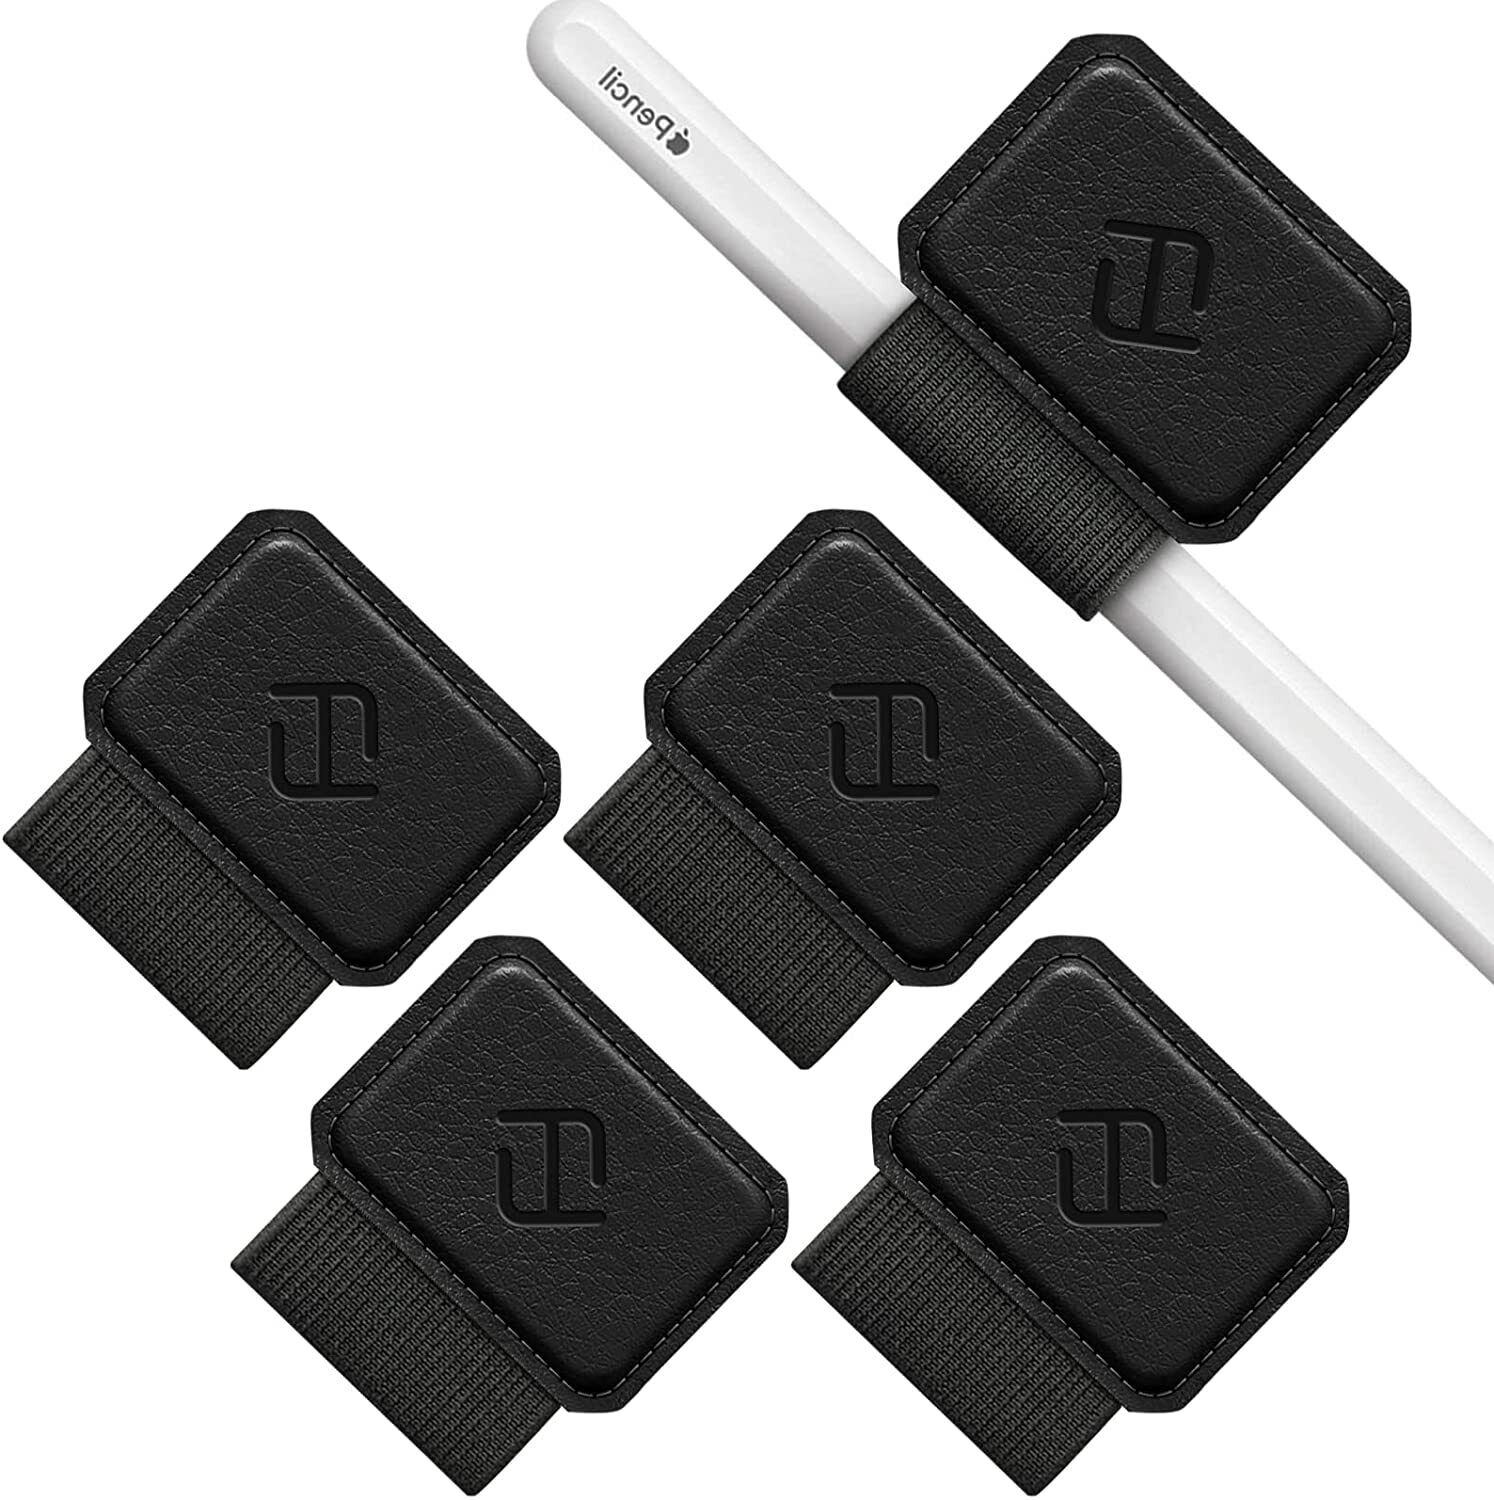 [4 Pack] Pen Loop Holder for Apple Pencil 1st 2nd Gen Adhesive Leather Pen Pouch